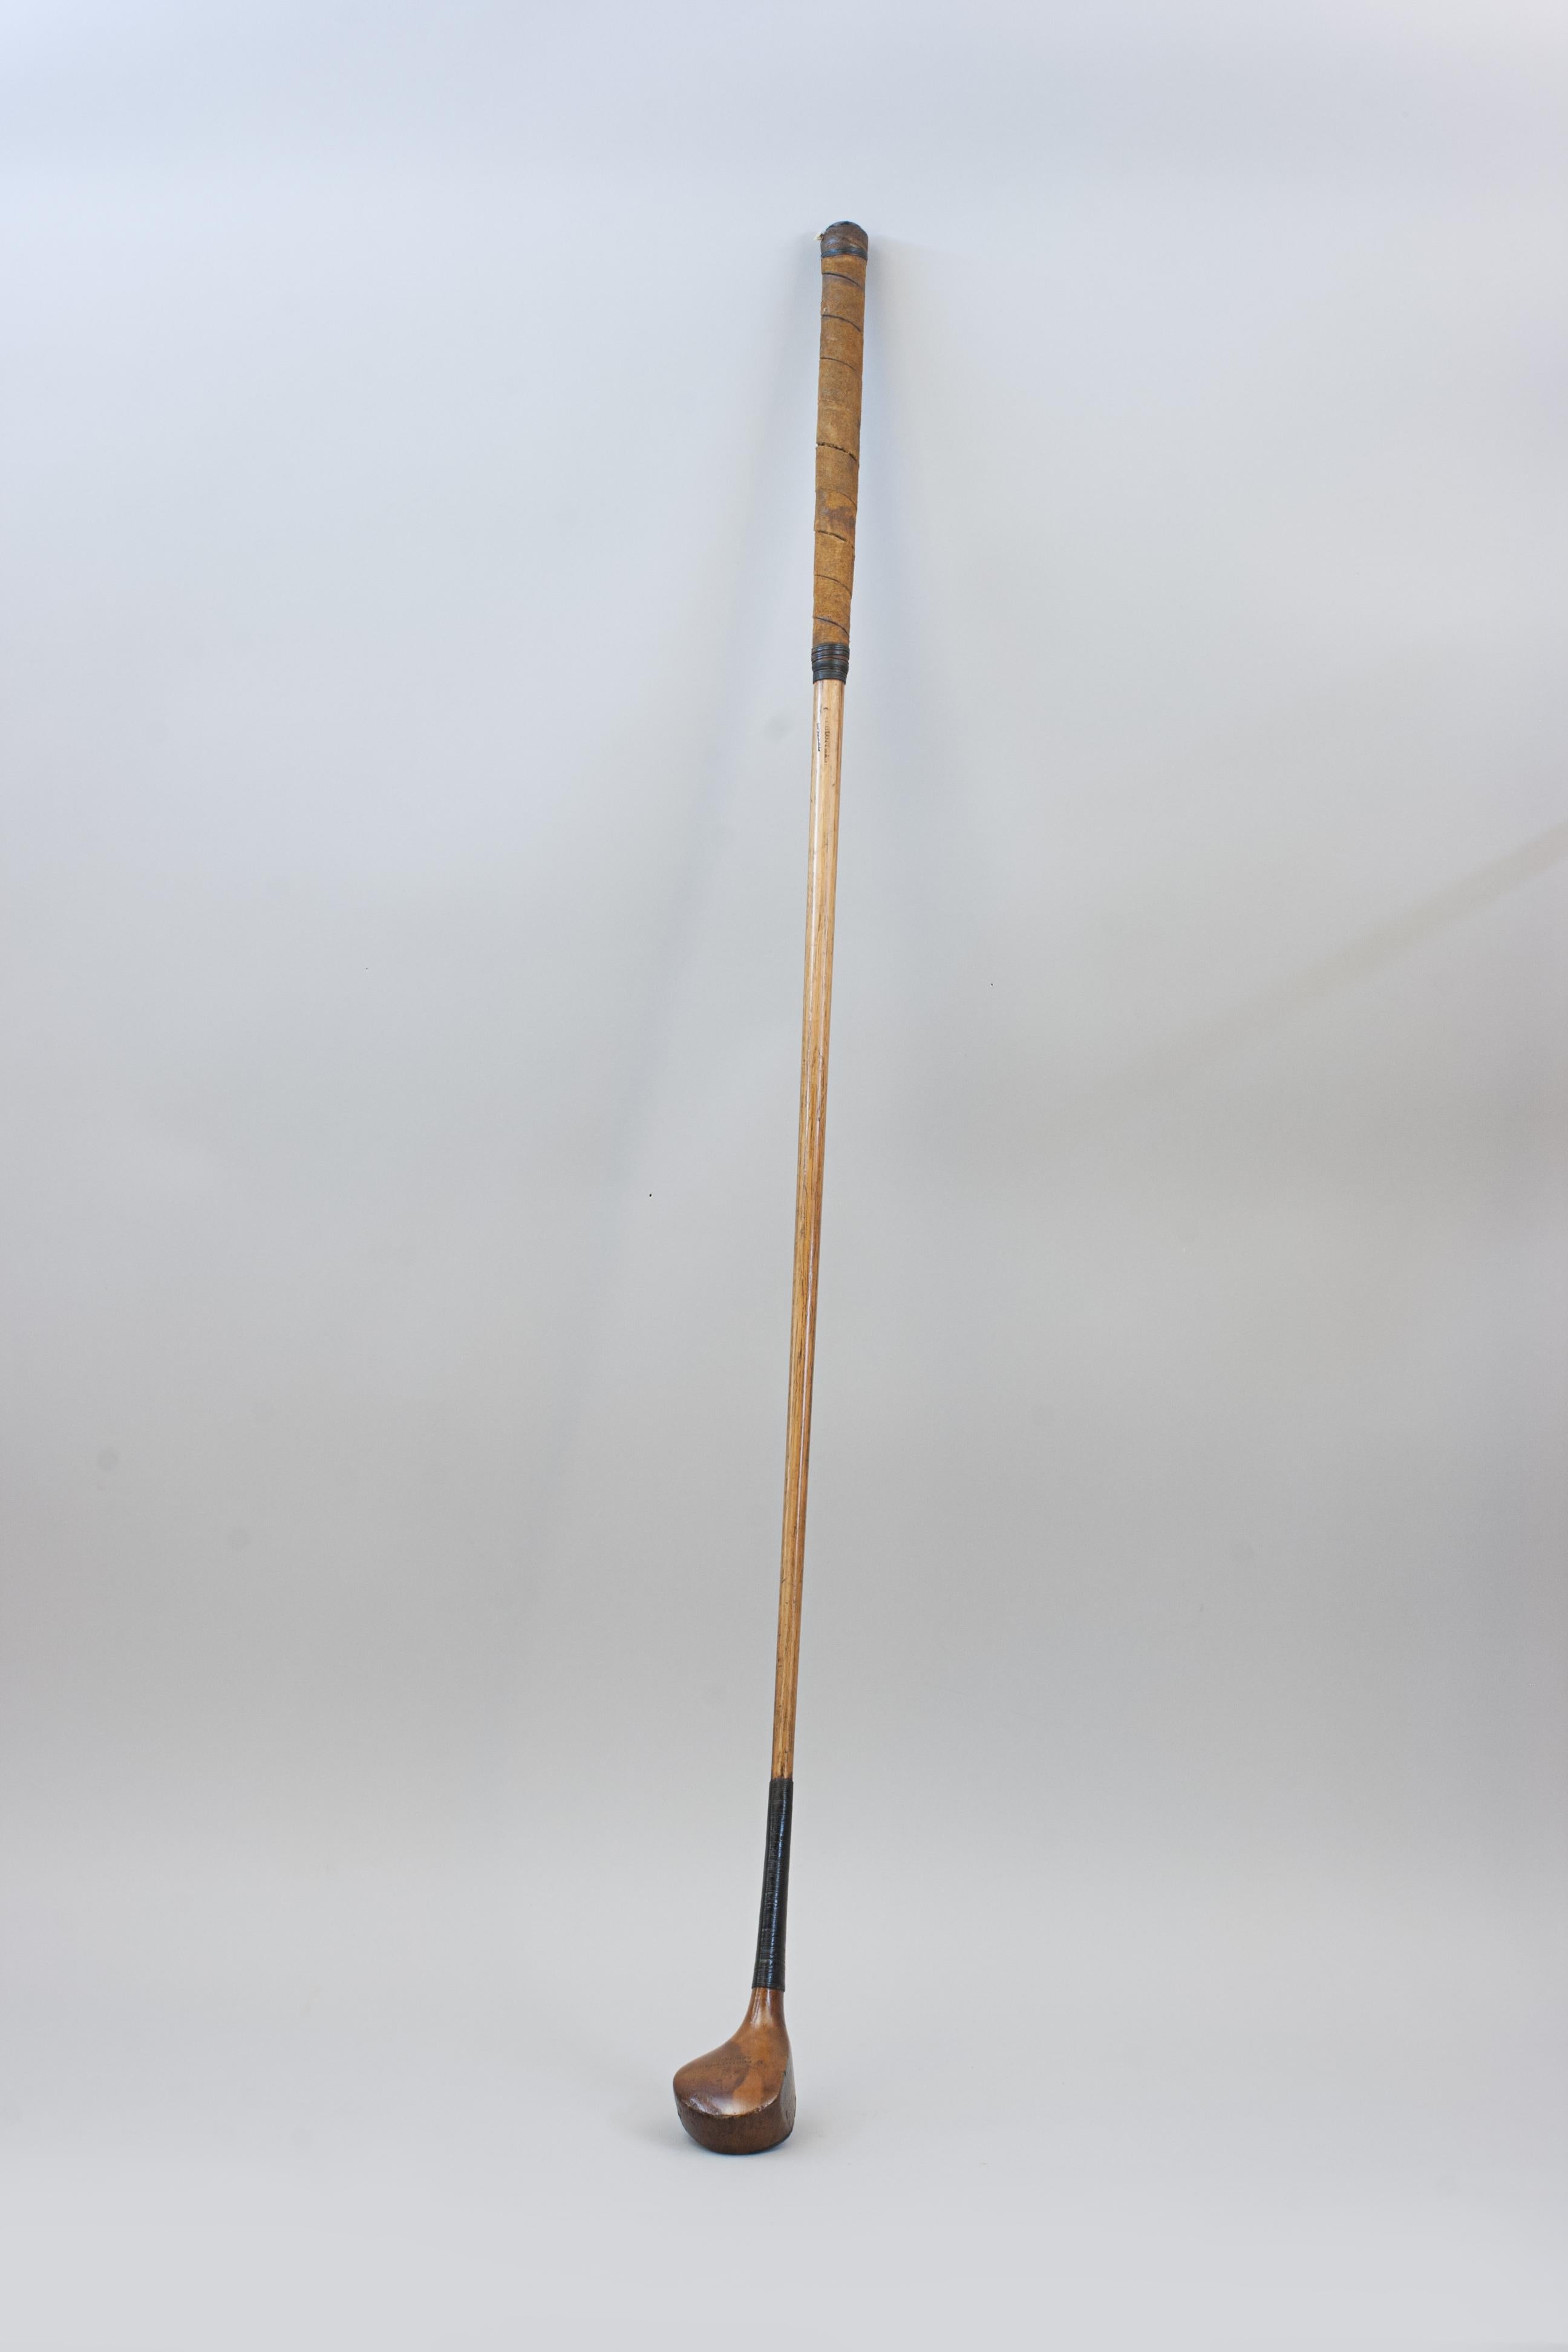 European A Persimmon Wood Golf Club, Driver With Scared Head. For Sale